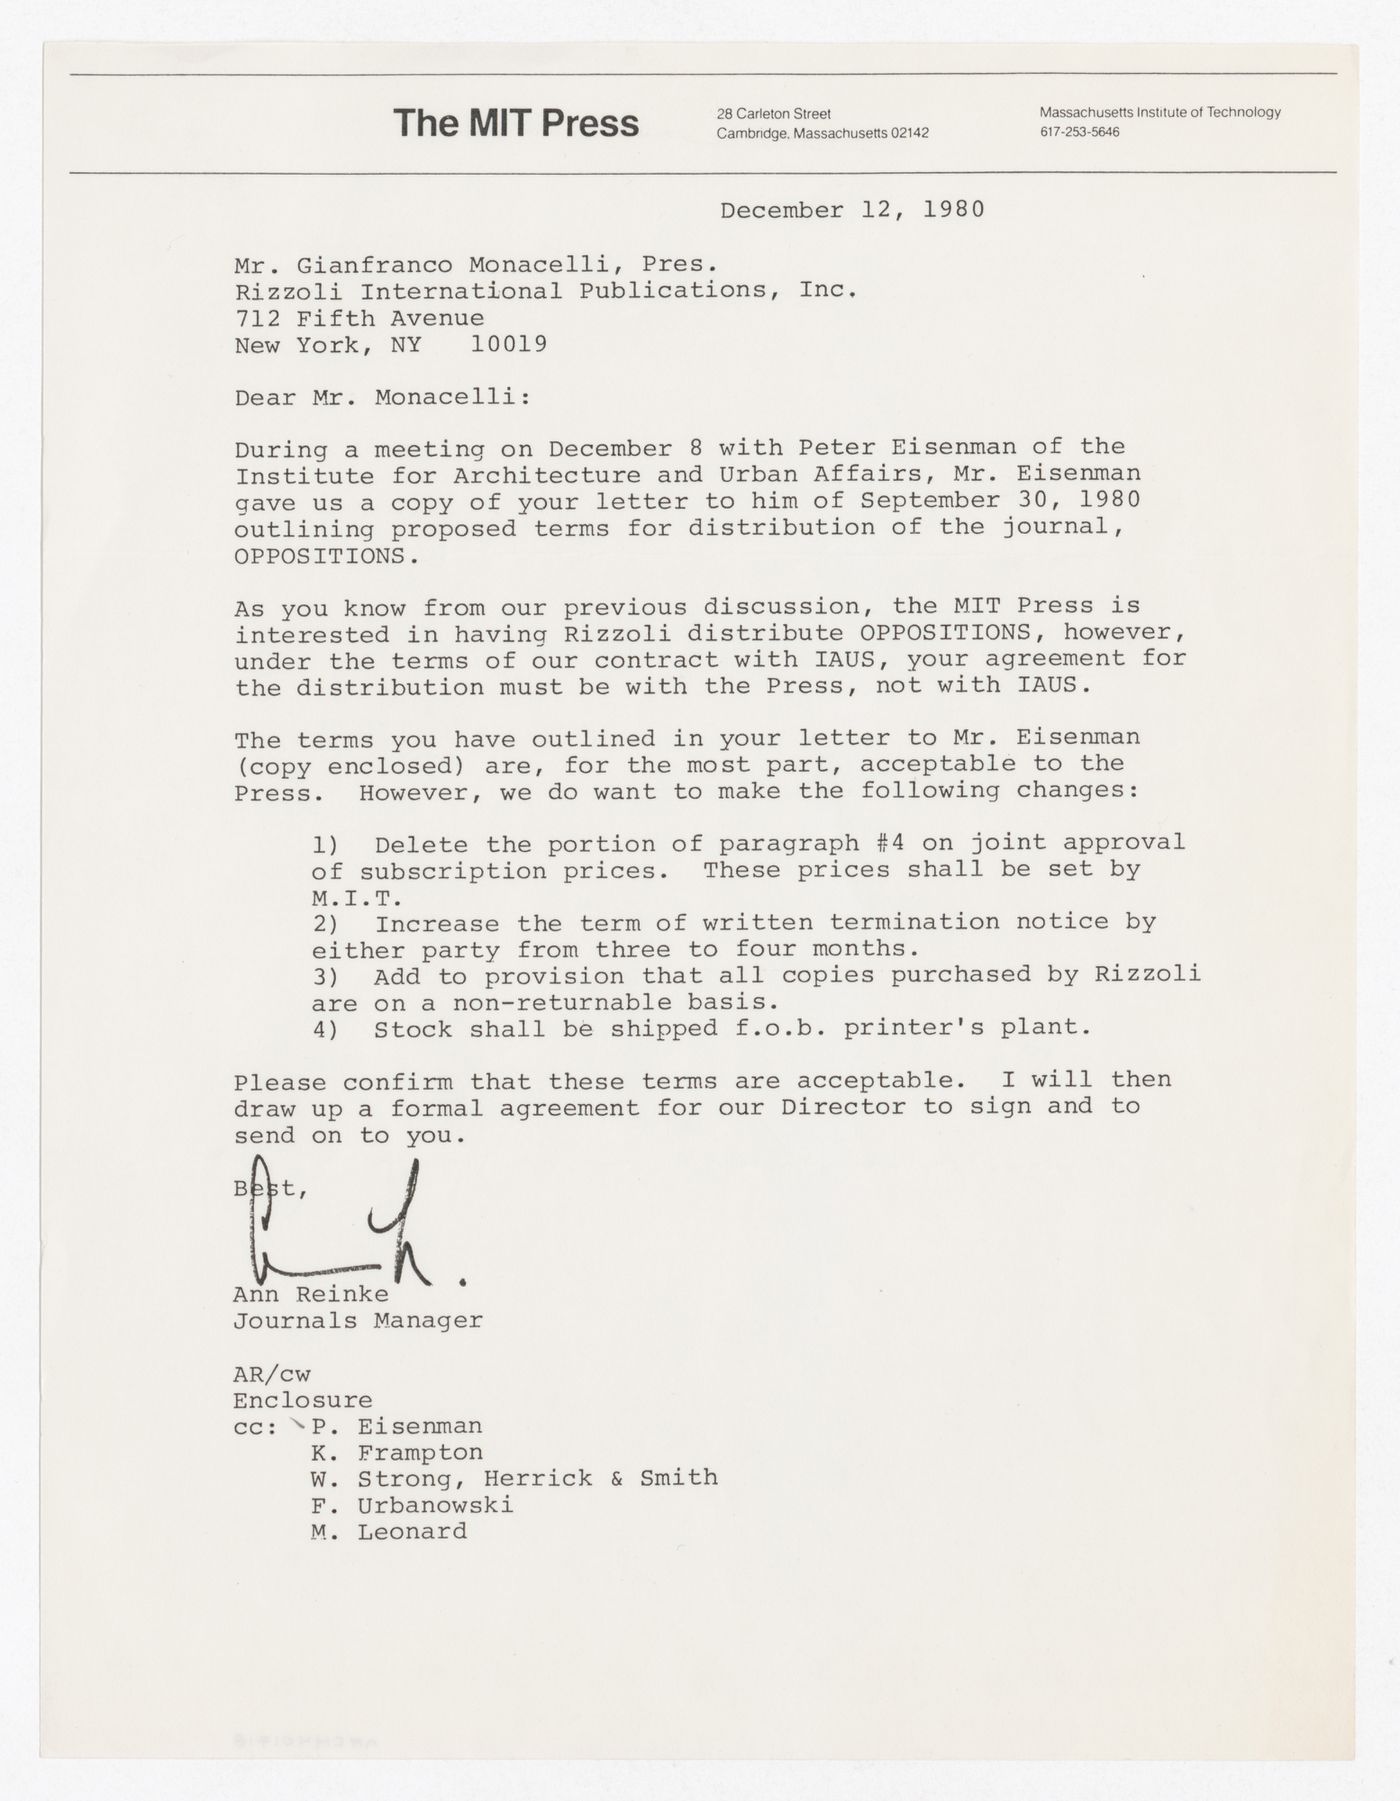 Letter from Ann Reinke to Gianfranco Monacelli about distribution of Oppositions Journal by Rizzoli